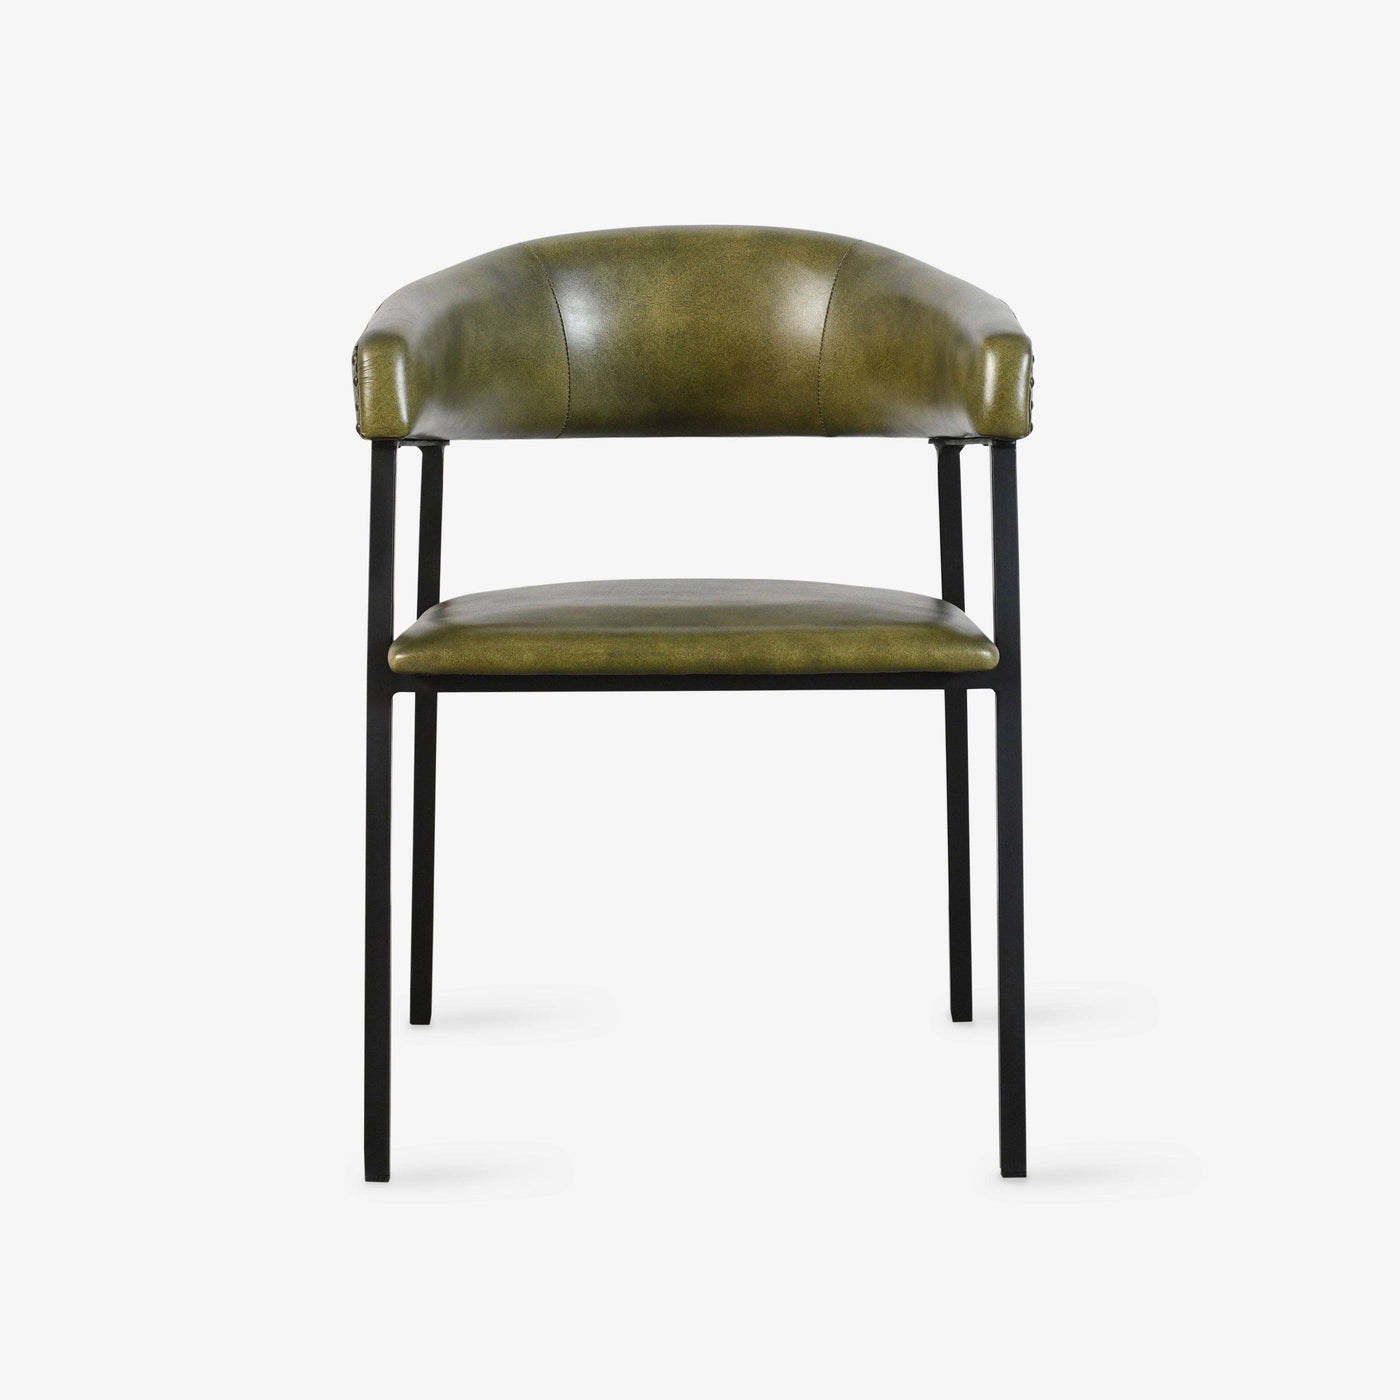 Iron Leather Accent Chair, Green, 54x58x74 cm - 1